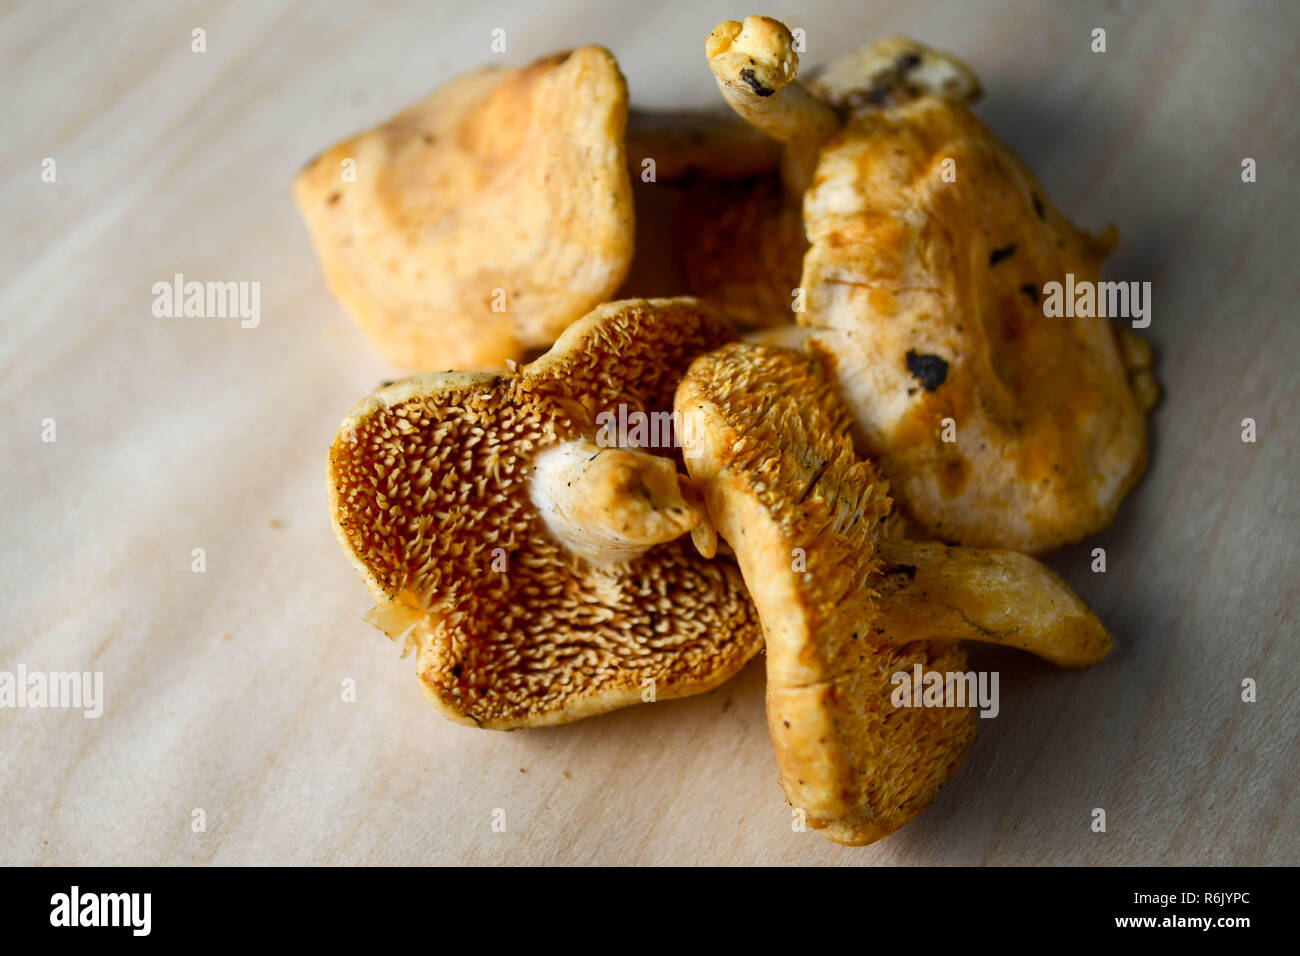 Hedgehog mushrooms (Hydnum repandum), also called sweet tooth and wood hedgehog mushrooms, shown on a pale wood background. Stock Photo